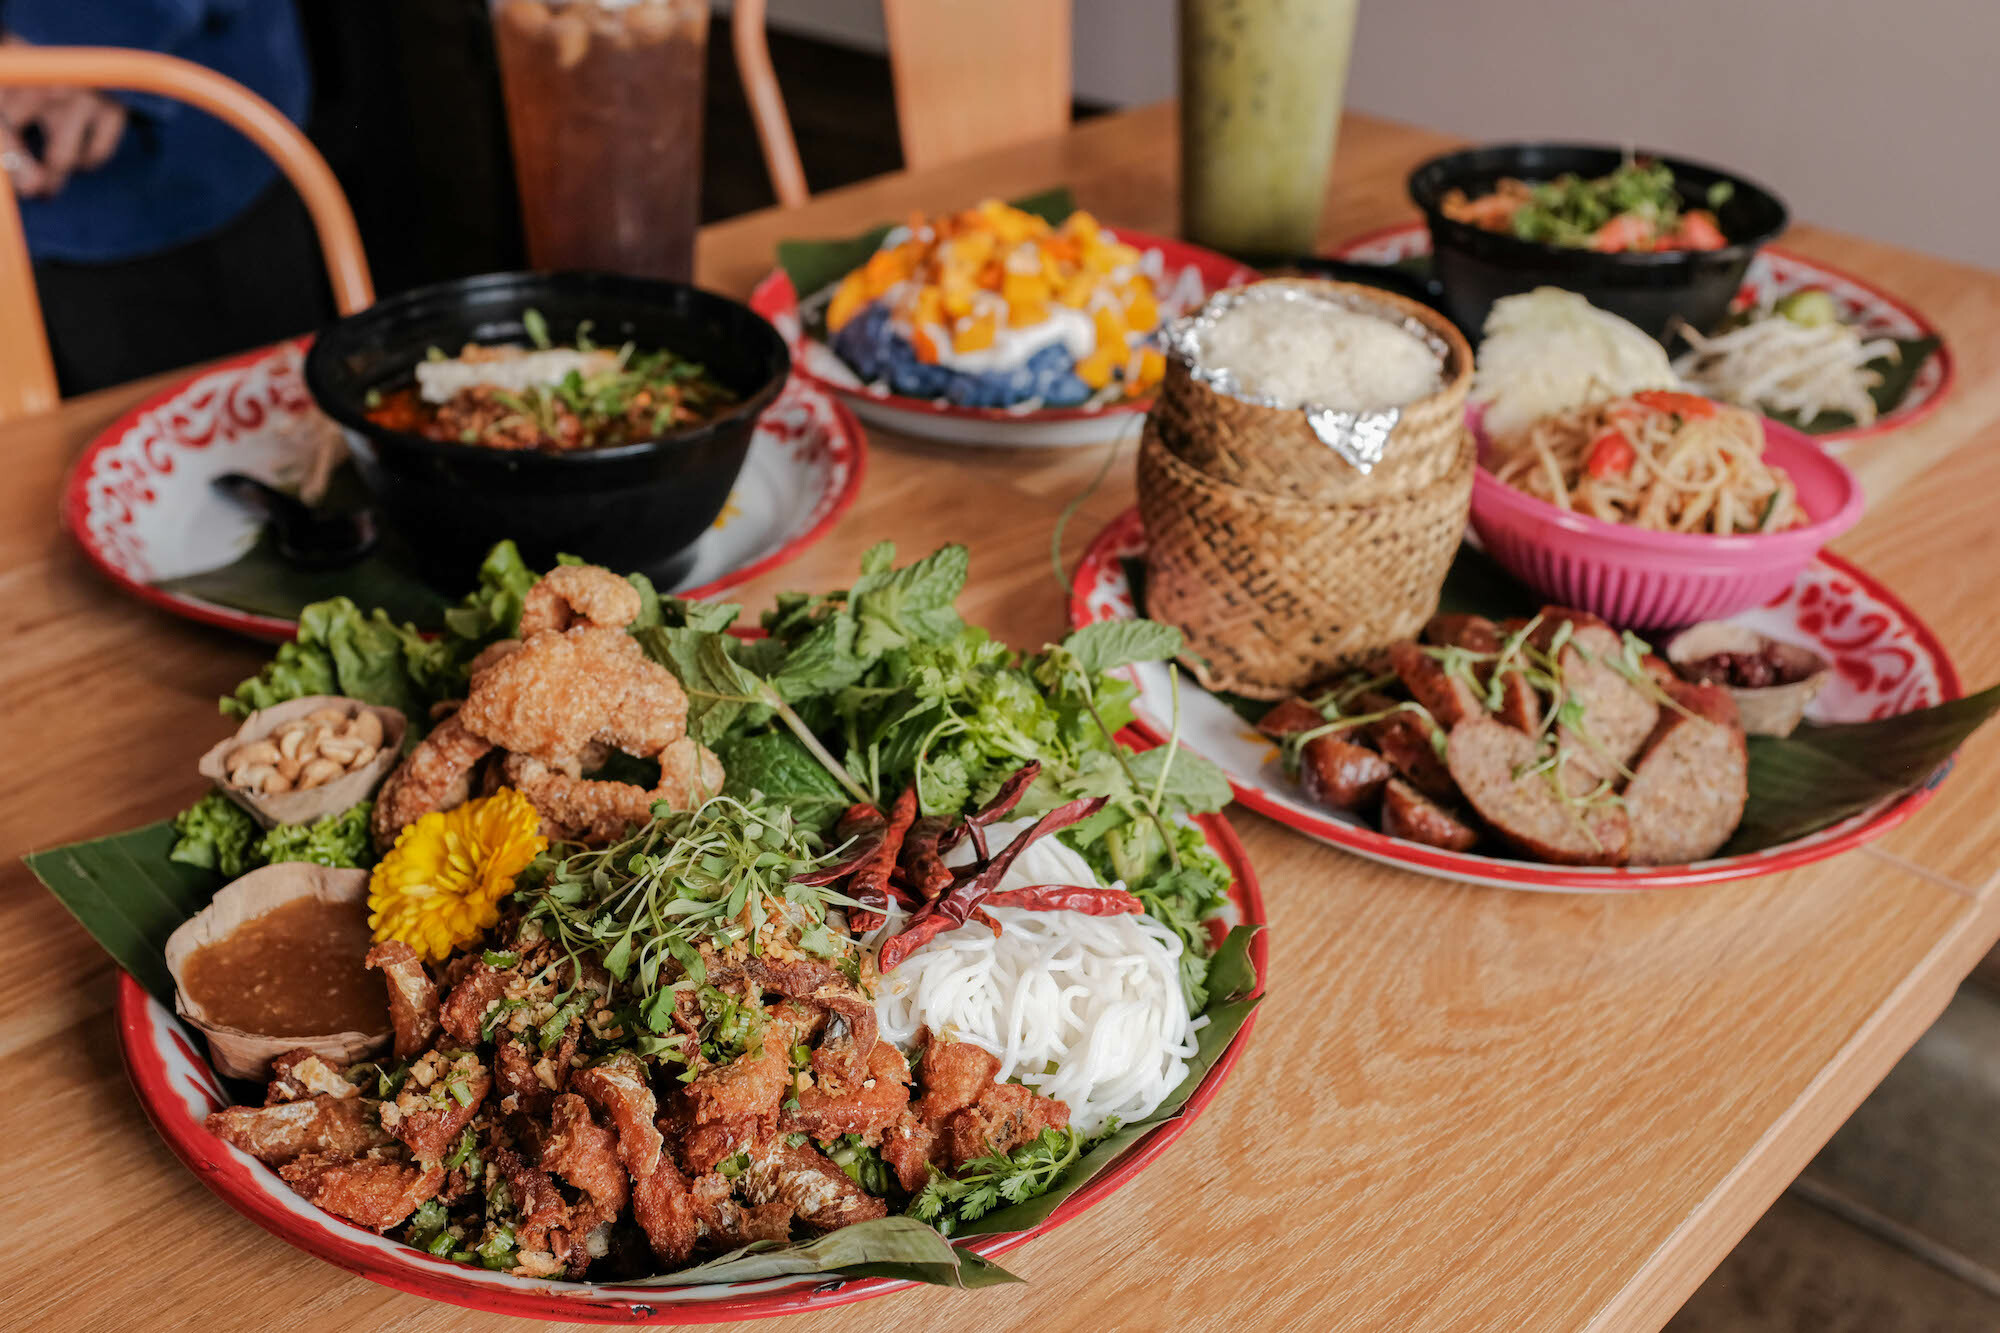 Review: Yum Sະlut serves funky, delicious Lao refugee cuisine